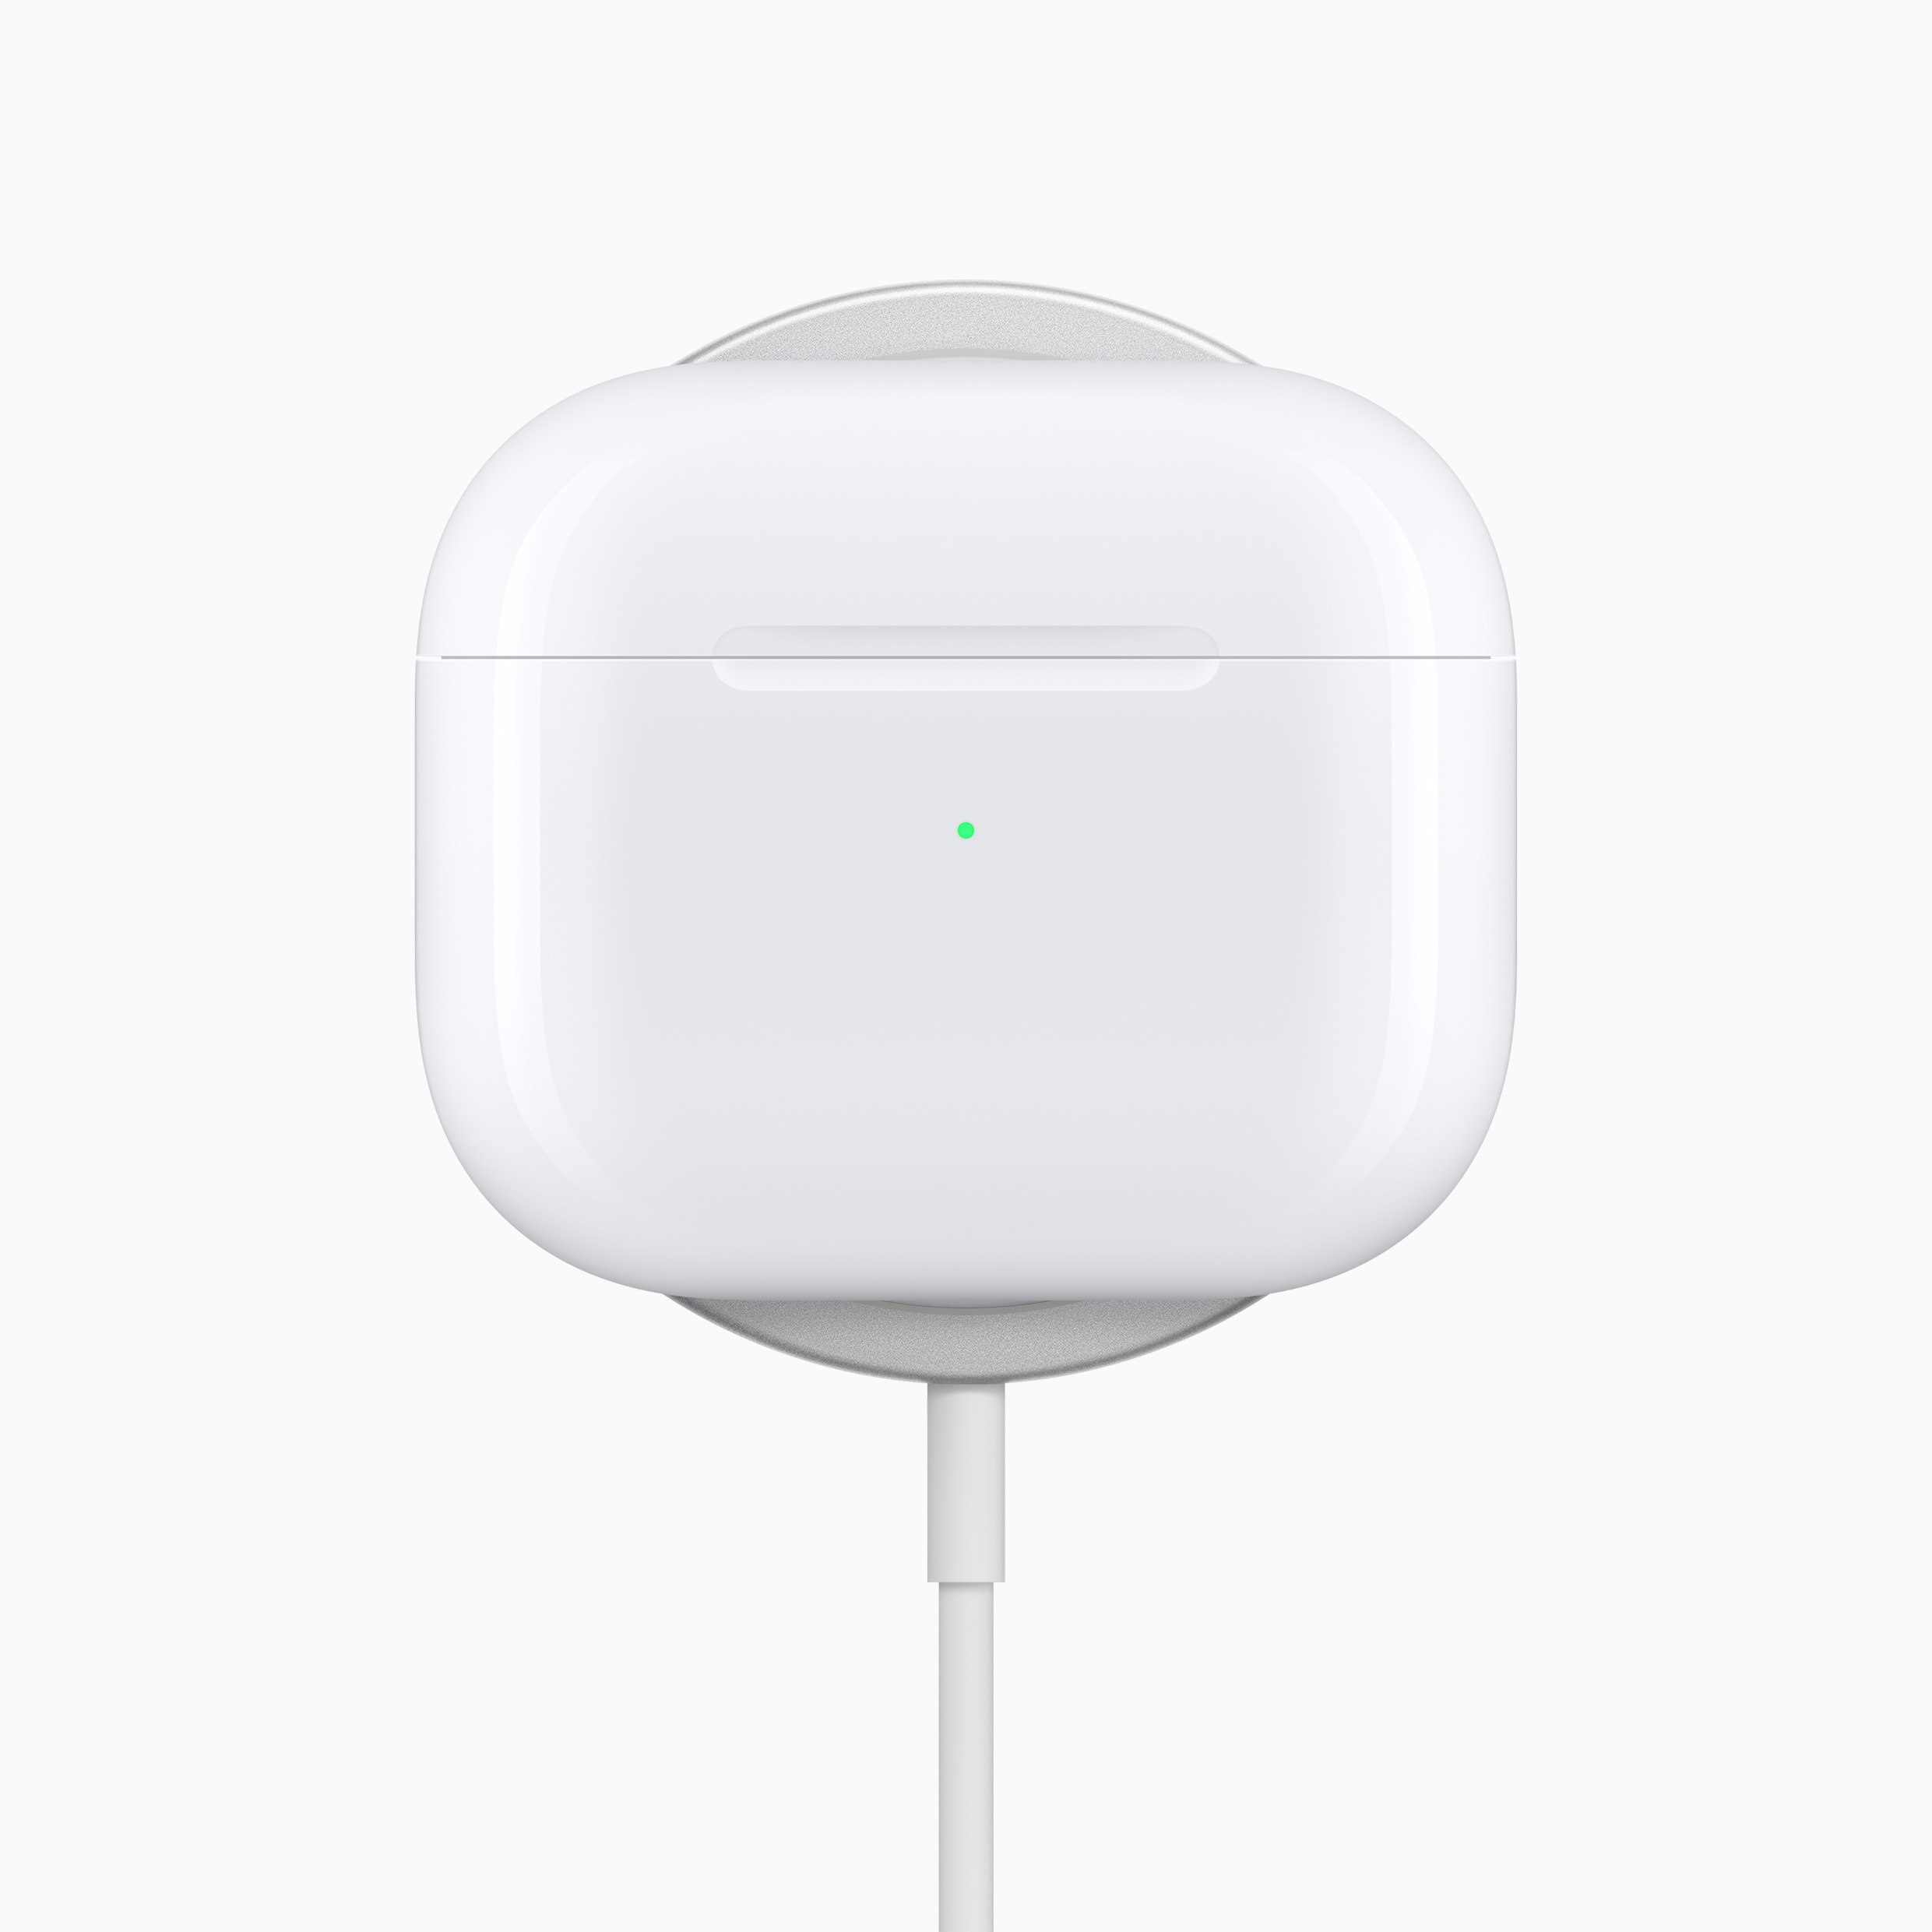 Introducing the next generation of AirPods - Apple (CA)